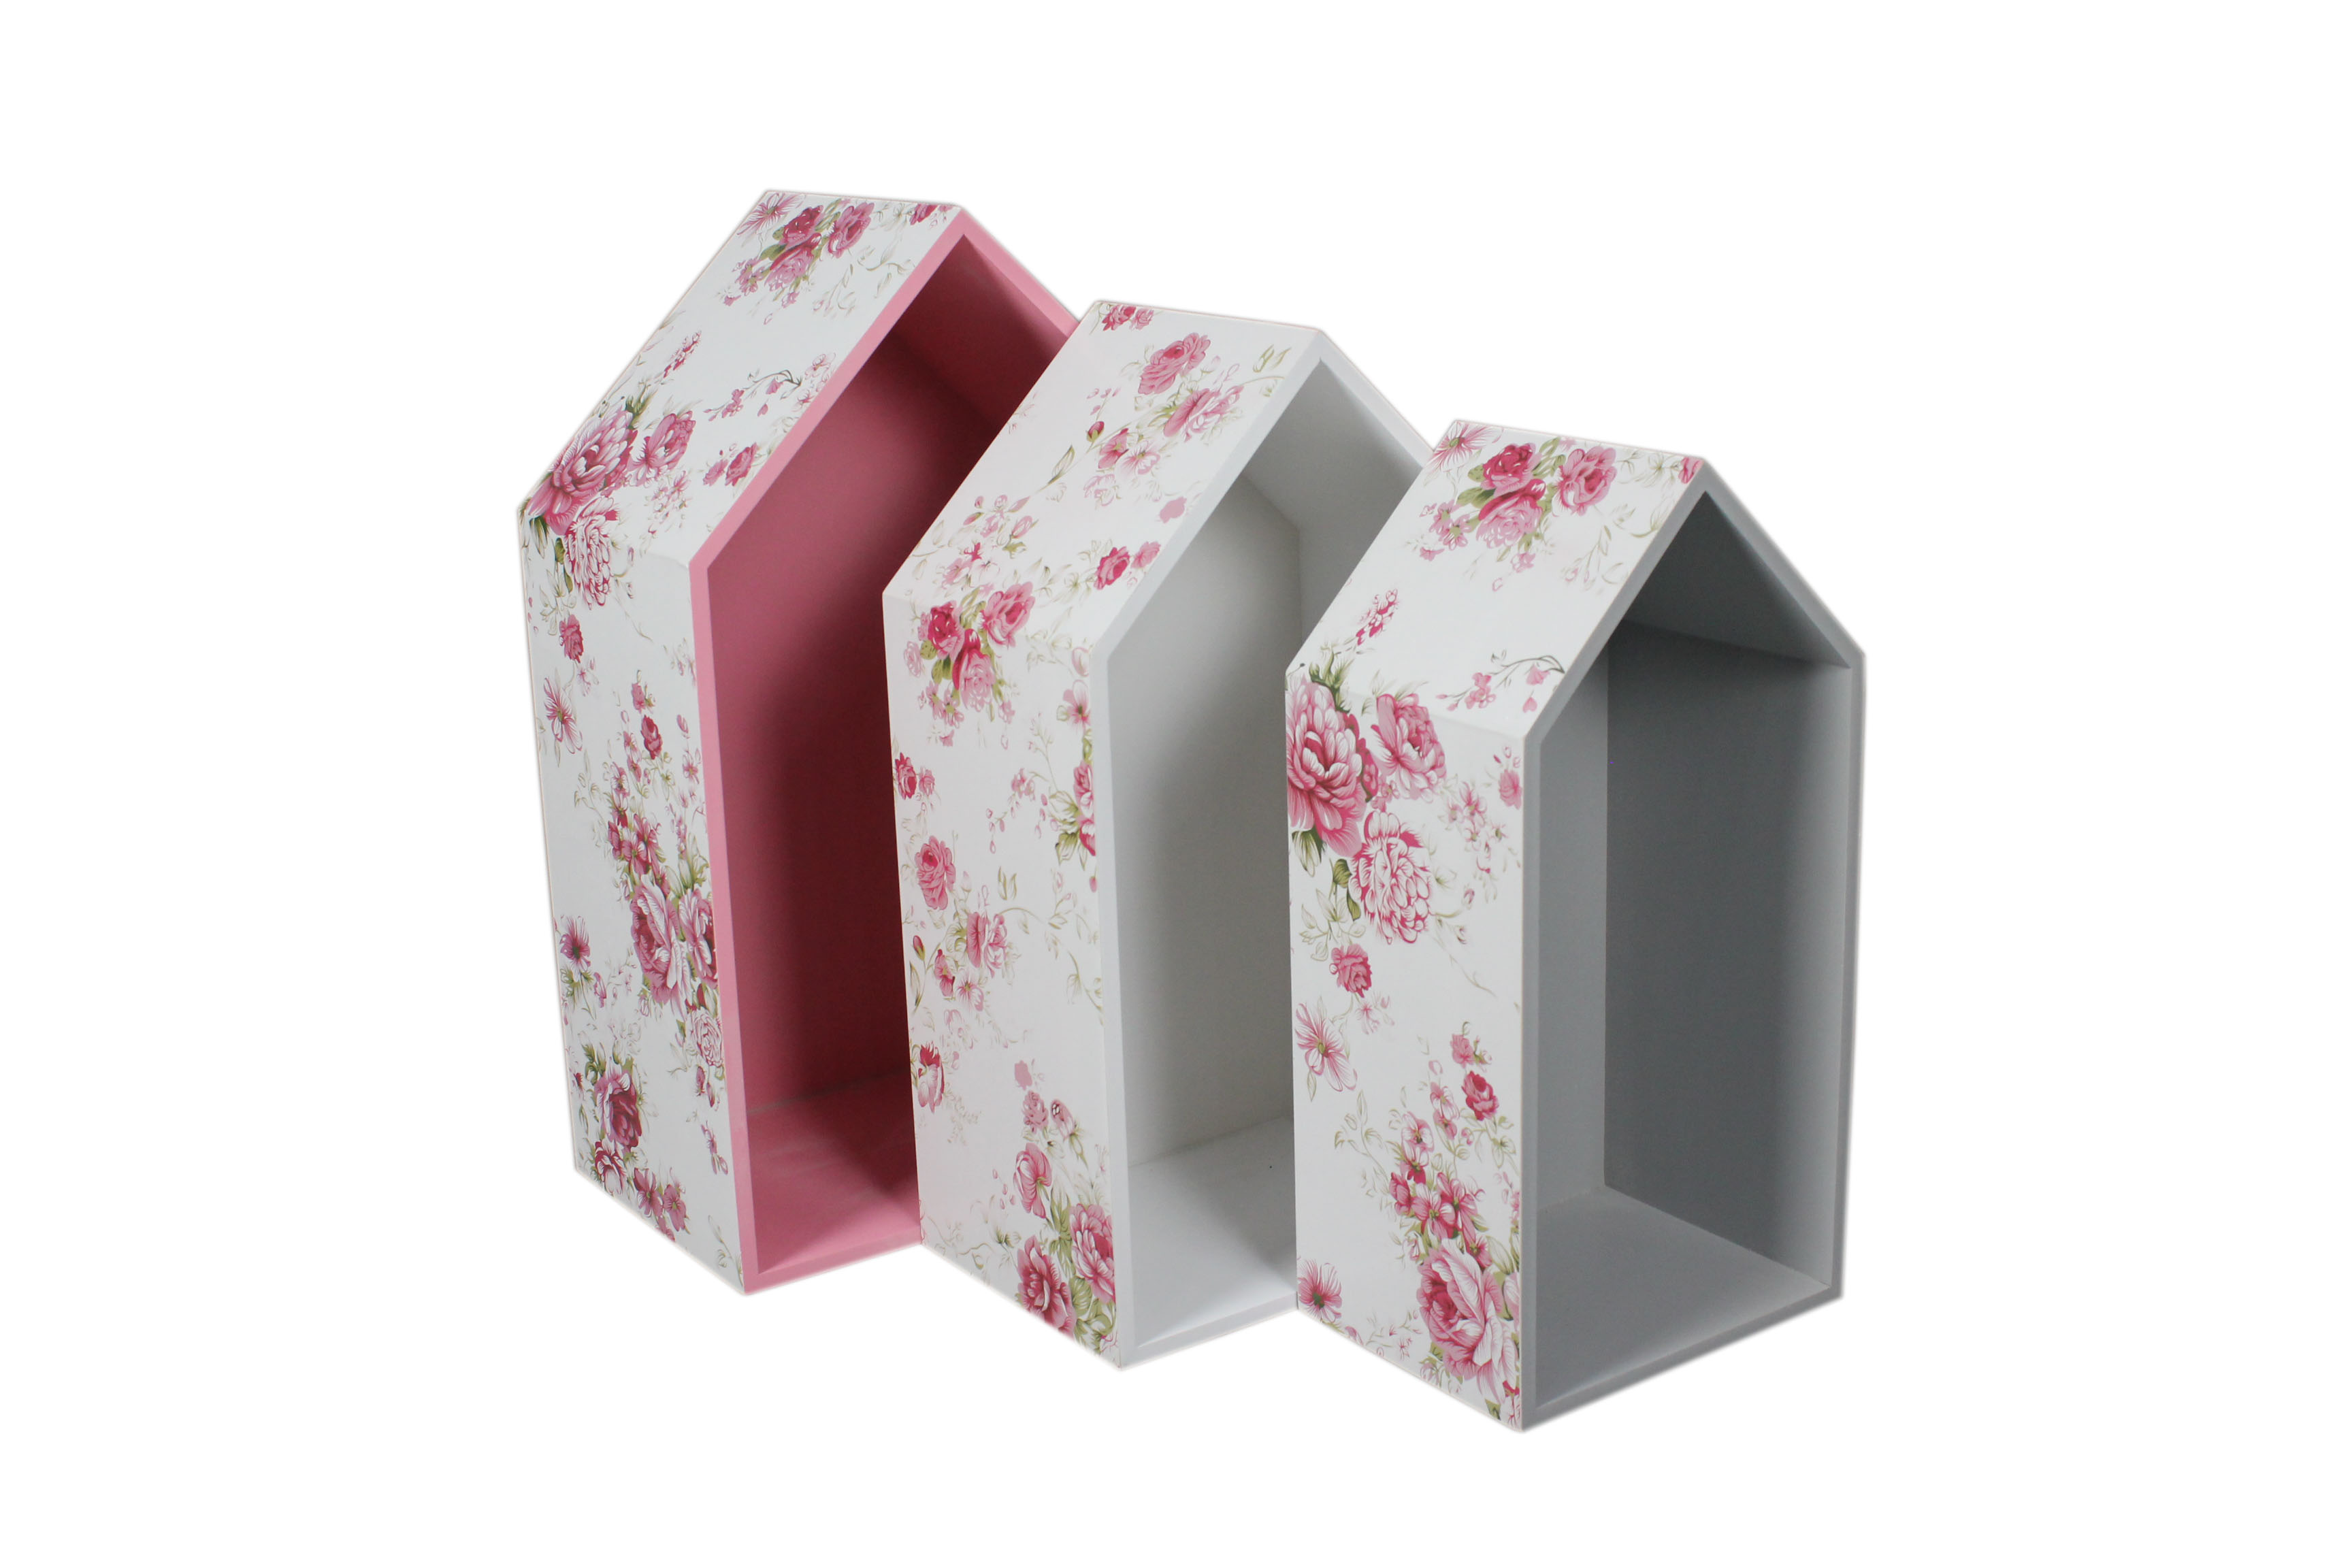 Flower wall shelf, Table storage boxes-4105 